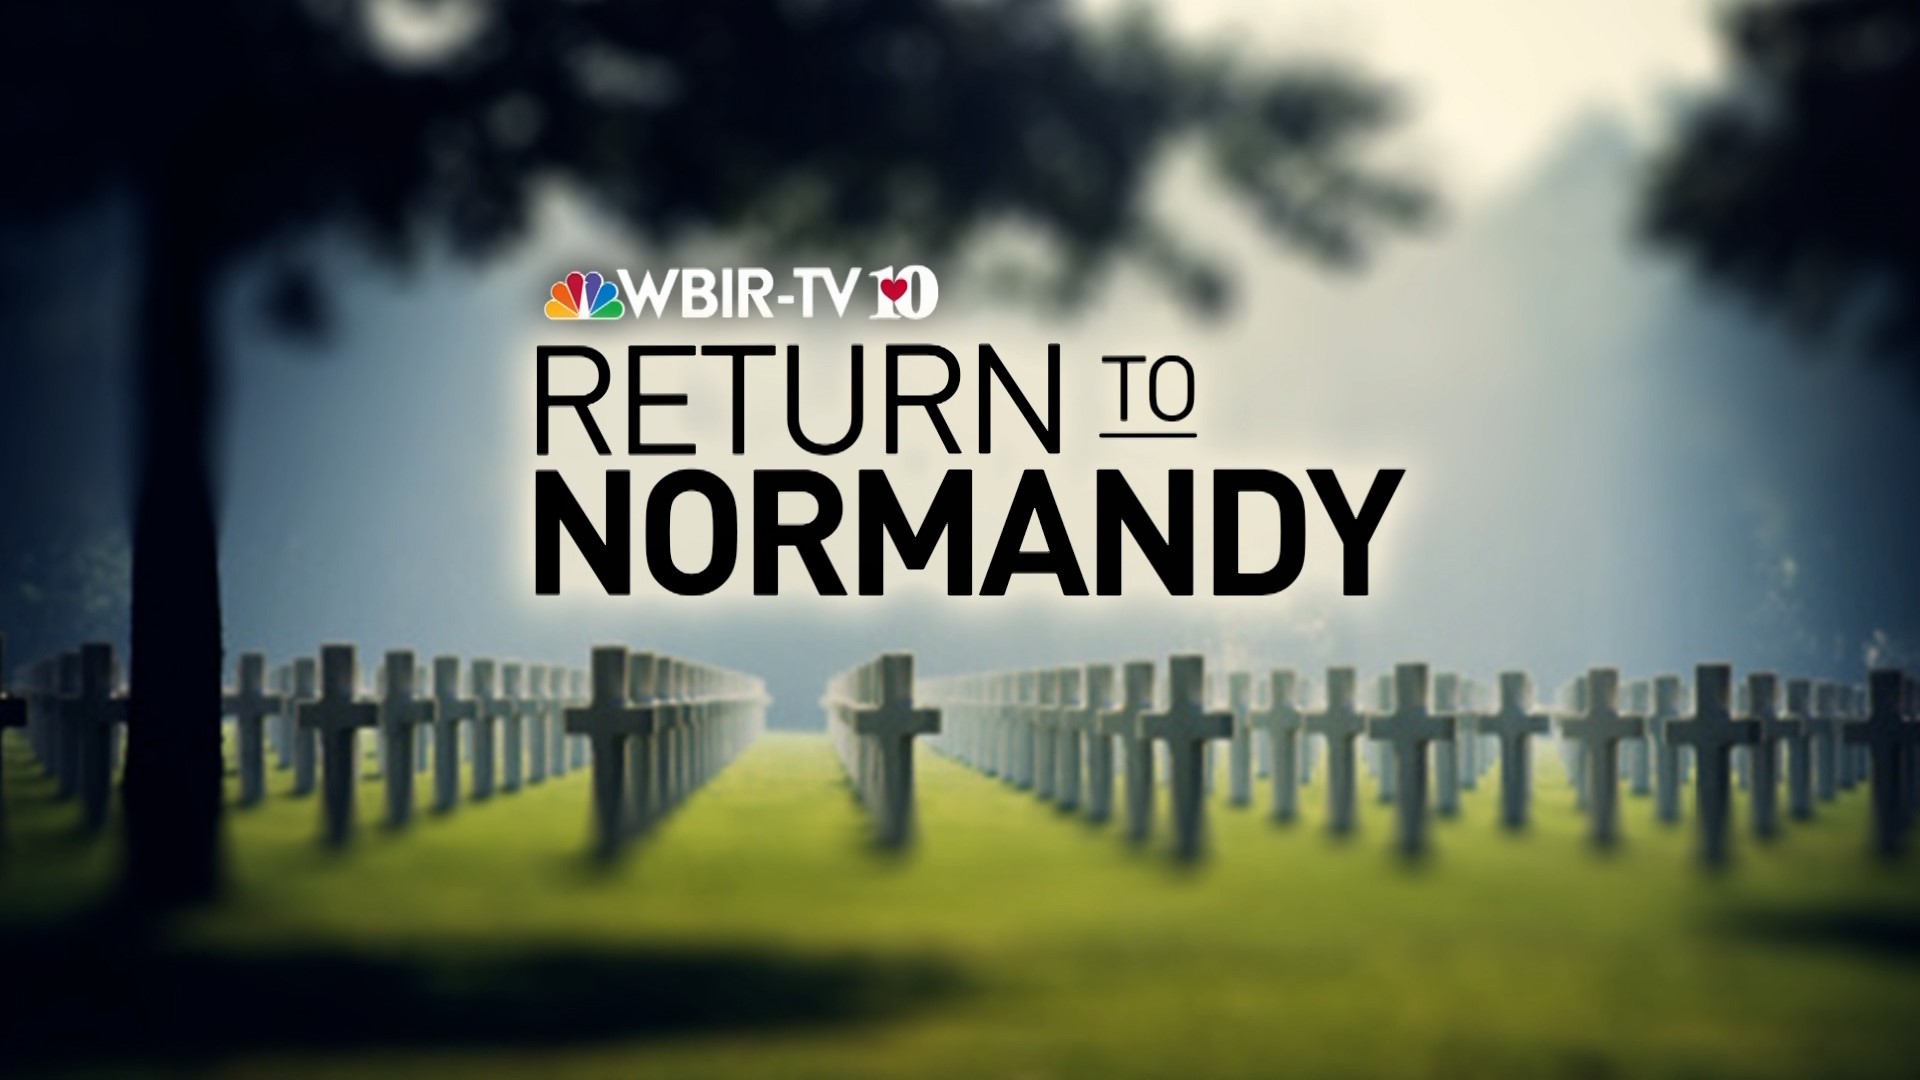 The Return to Normandy special is a look at the largest land and sea invasion in history through the eyes of two self-described “farm boys” from East Tennessee.